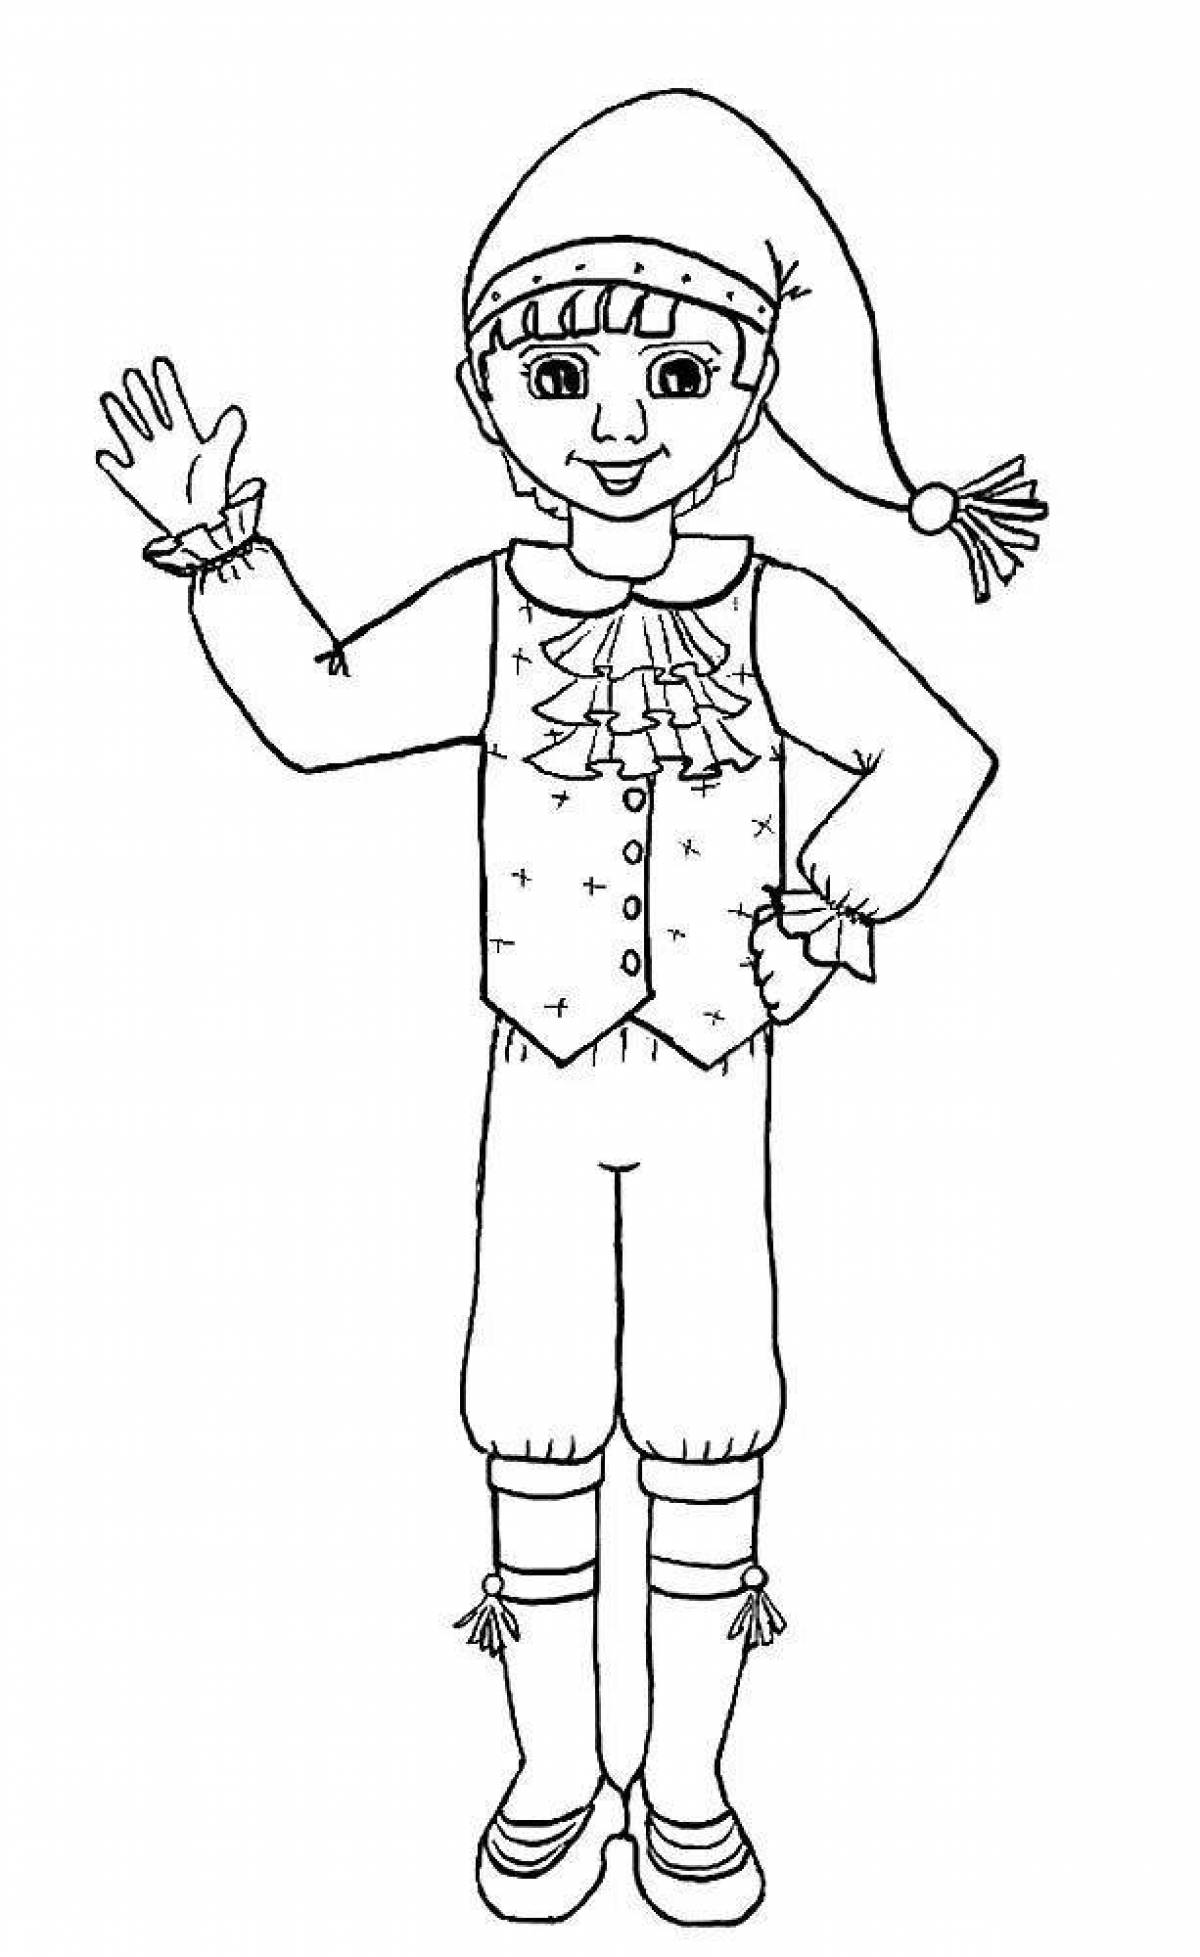 Coloring page for a festive costume for children